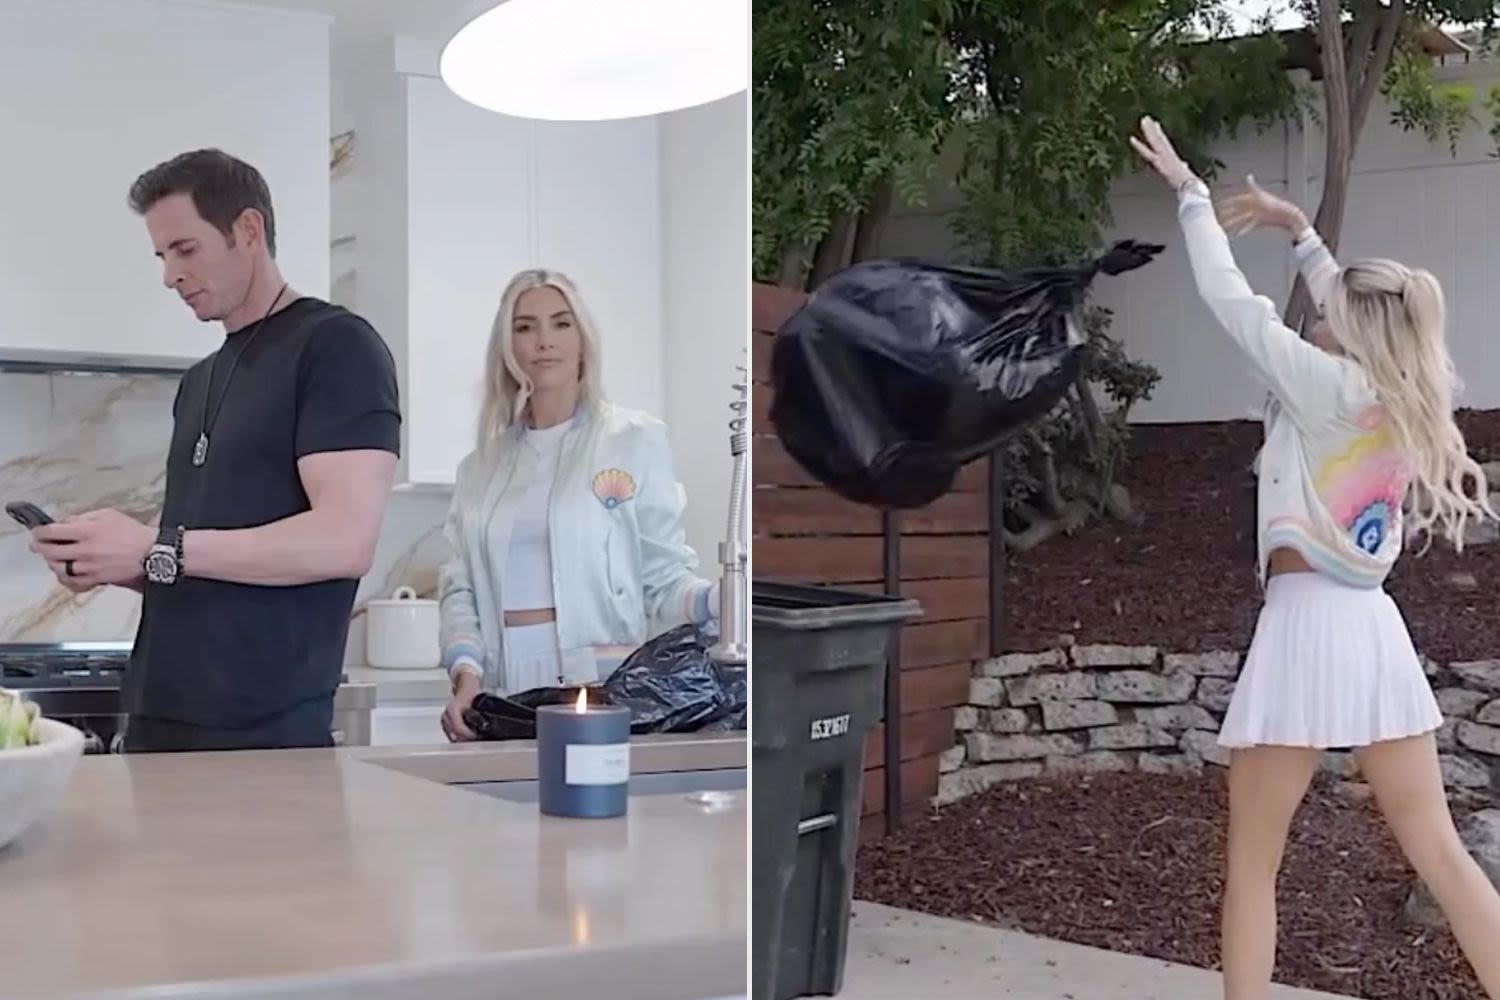 Tarek El Moussa Responds After His Latest Skit with Wife Heather Is Called 'Violent'